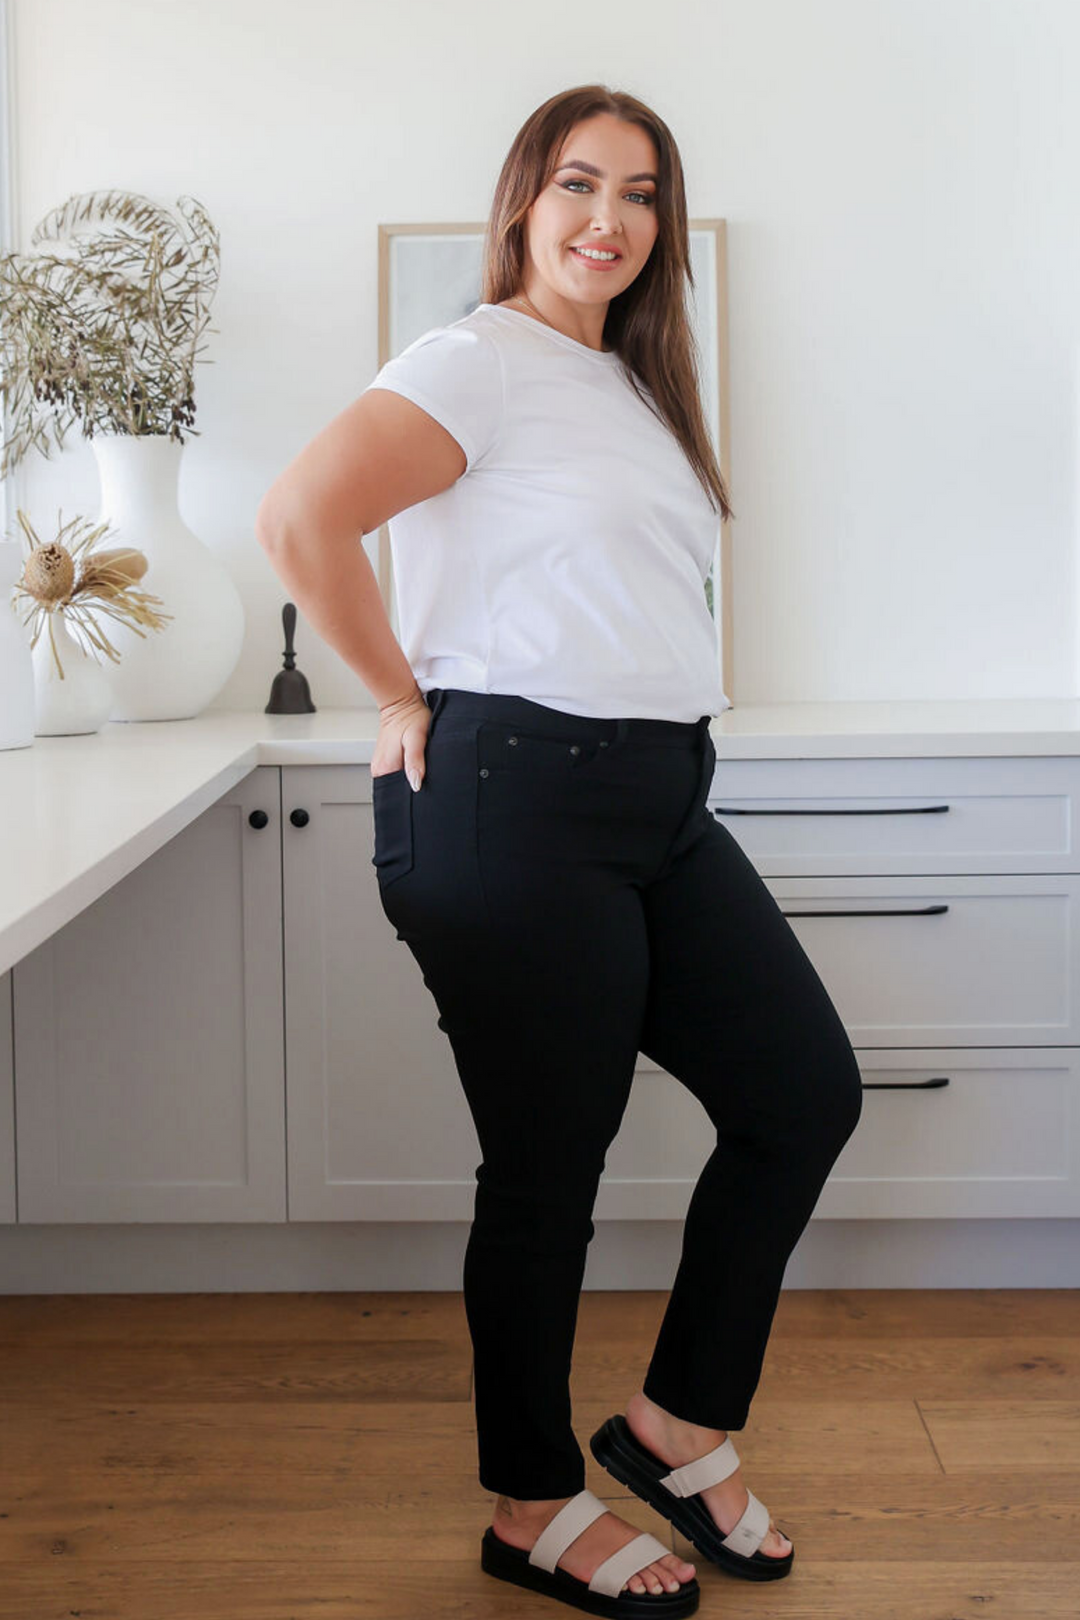 Ladies Black Jeans - Full Length Stretch Jeans - Functional Front + Back Pockets - Sizes 6 - 26 - Delta Jeans Black - Daisy's Closet